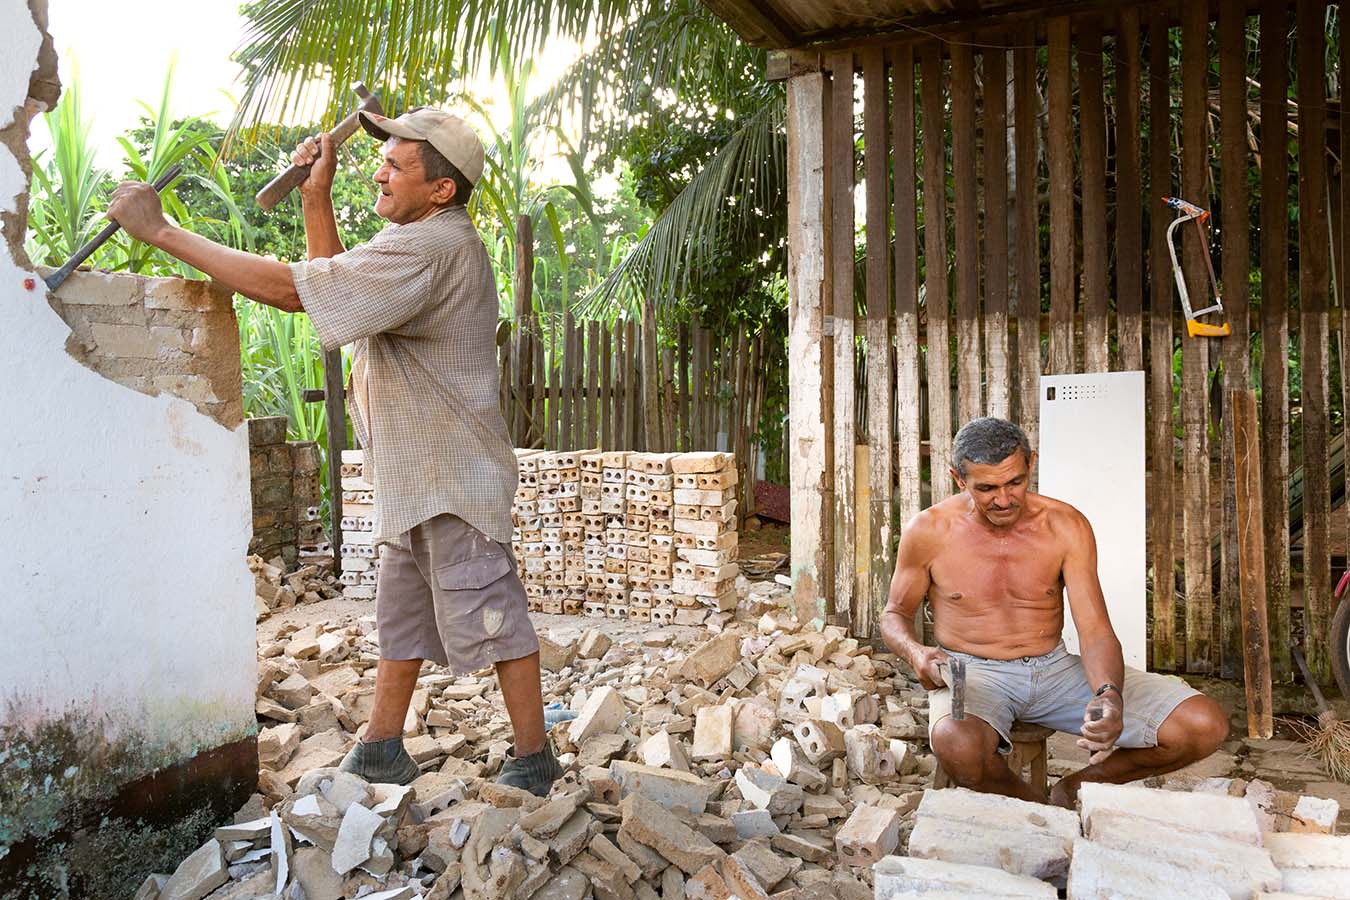 Unbricking an entire house on Perimetral Avenue, Altamira, Pará, 2015. Photo by Carlos Fausto.